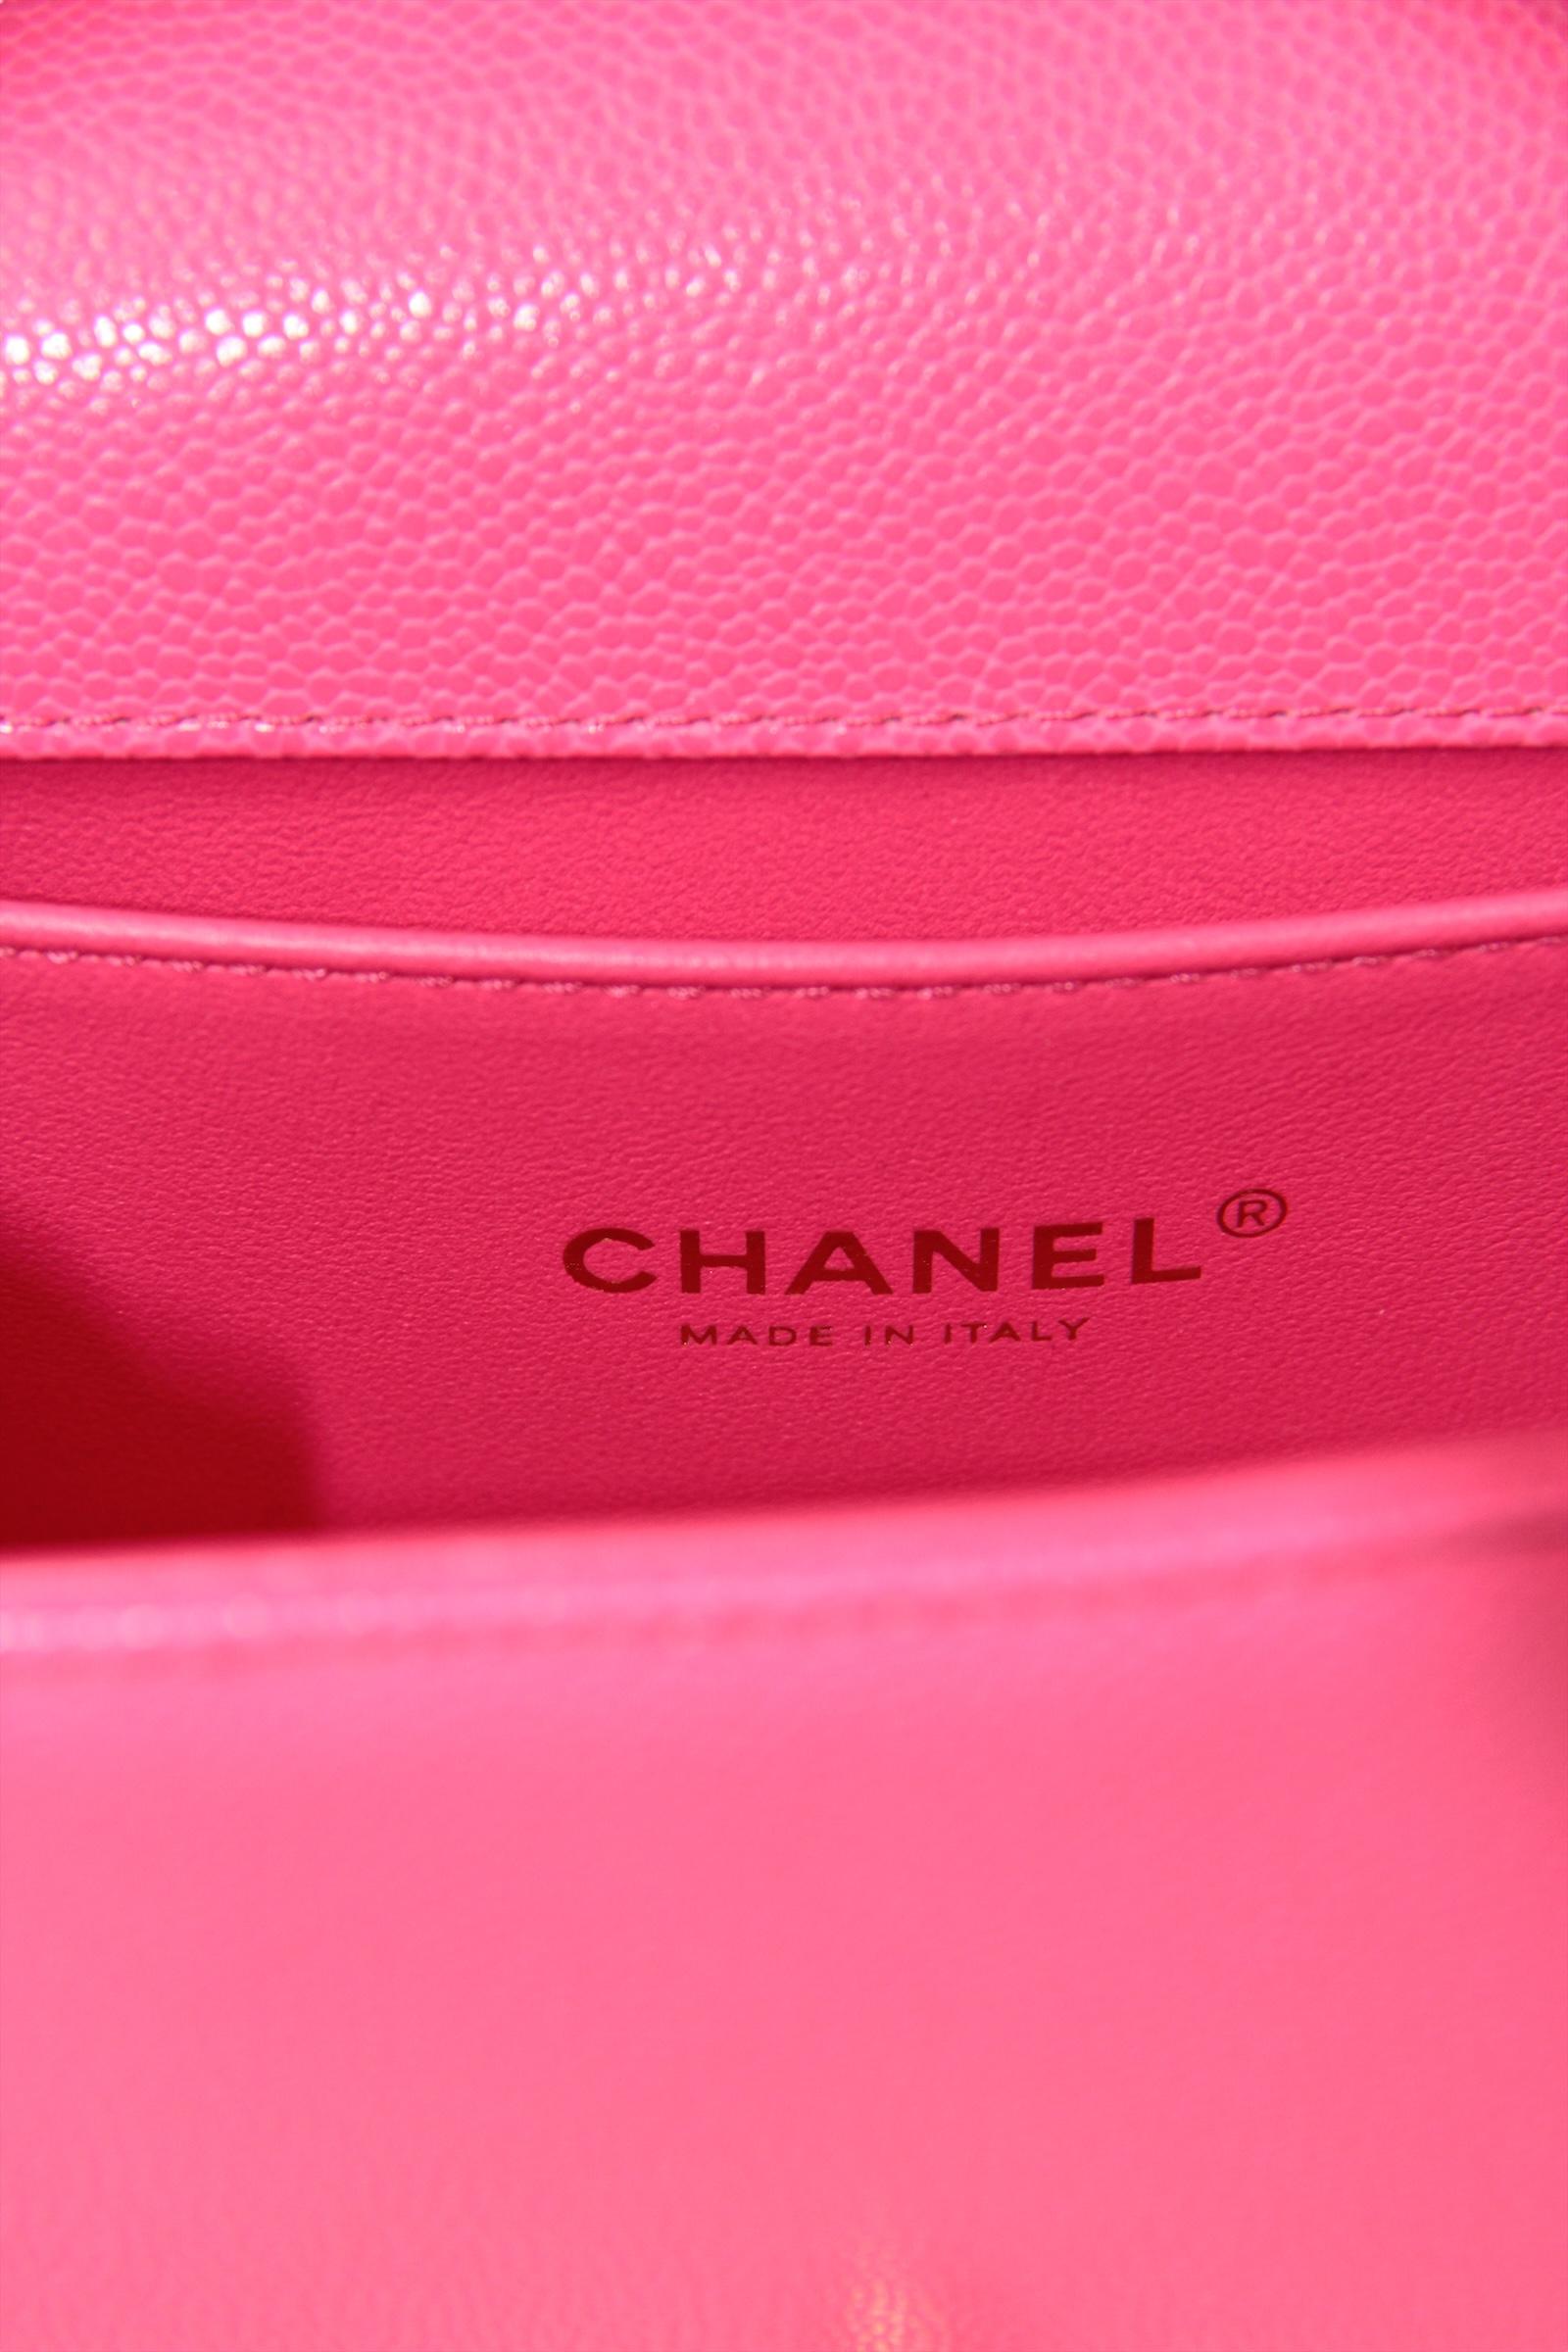 Chanel 2024C Fuchsia Neon Pink Caviar Leather Quilted Small Boy Bag For Sale 5